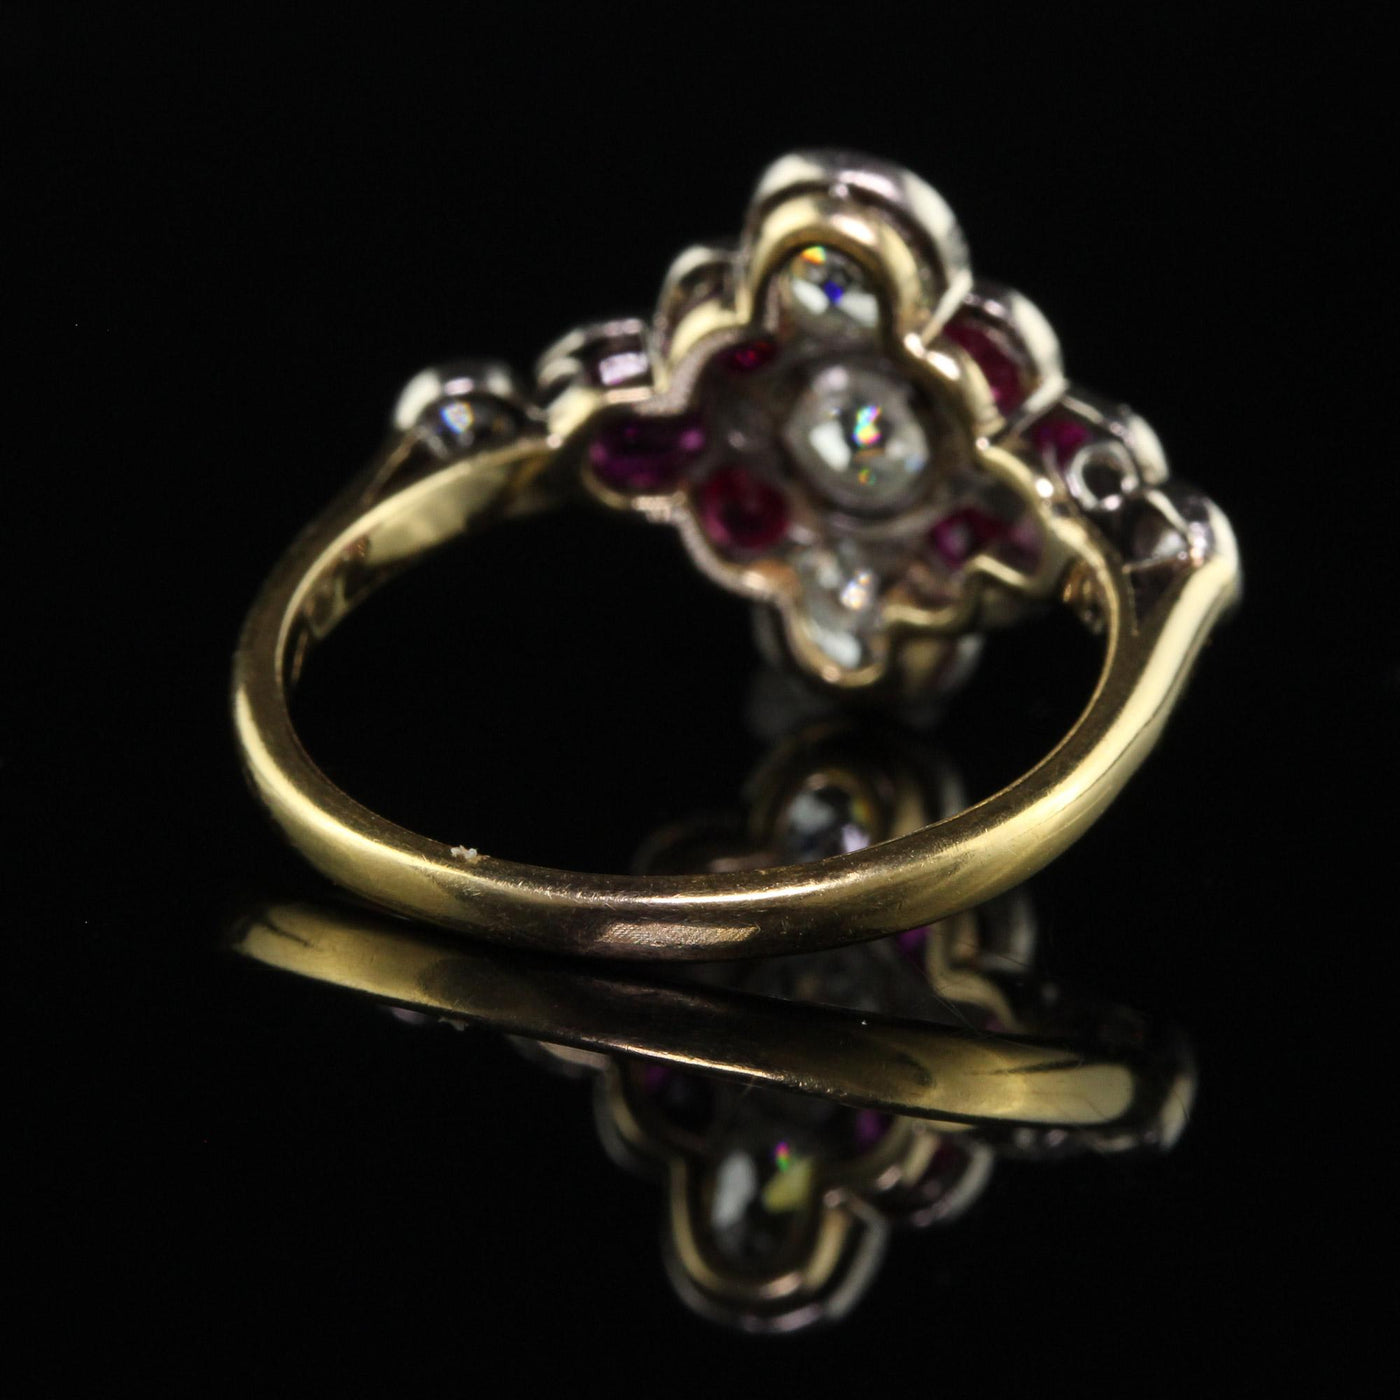 Antique Art Deco 18K Yellow Gold Old Mine Diamond and Ruby Floral Ring